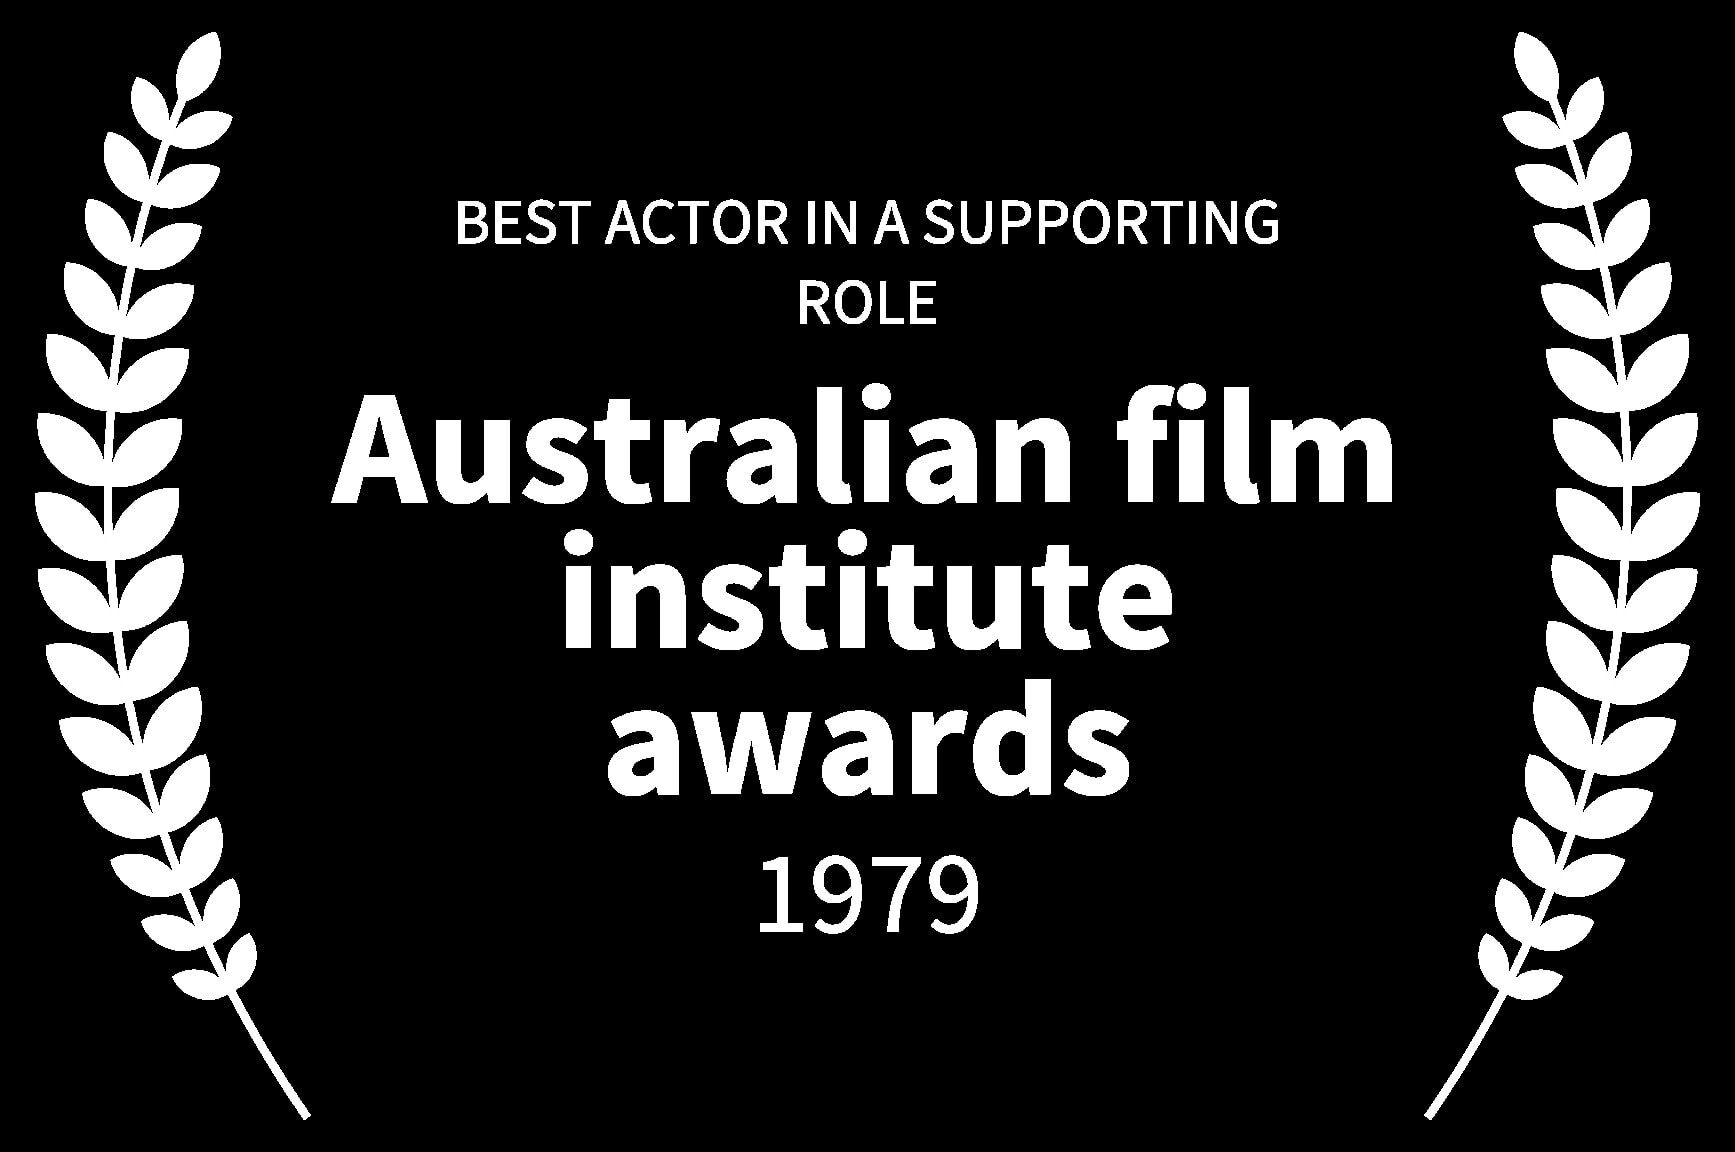 BEST ACTOR IN A SUPPORTING ROLE - Australian film institute awards - 1979 - MAD MAX